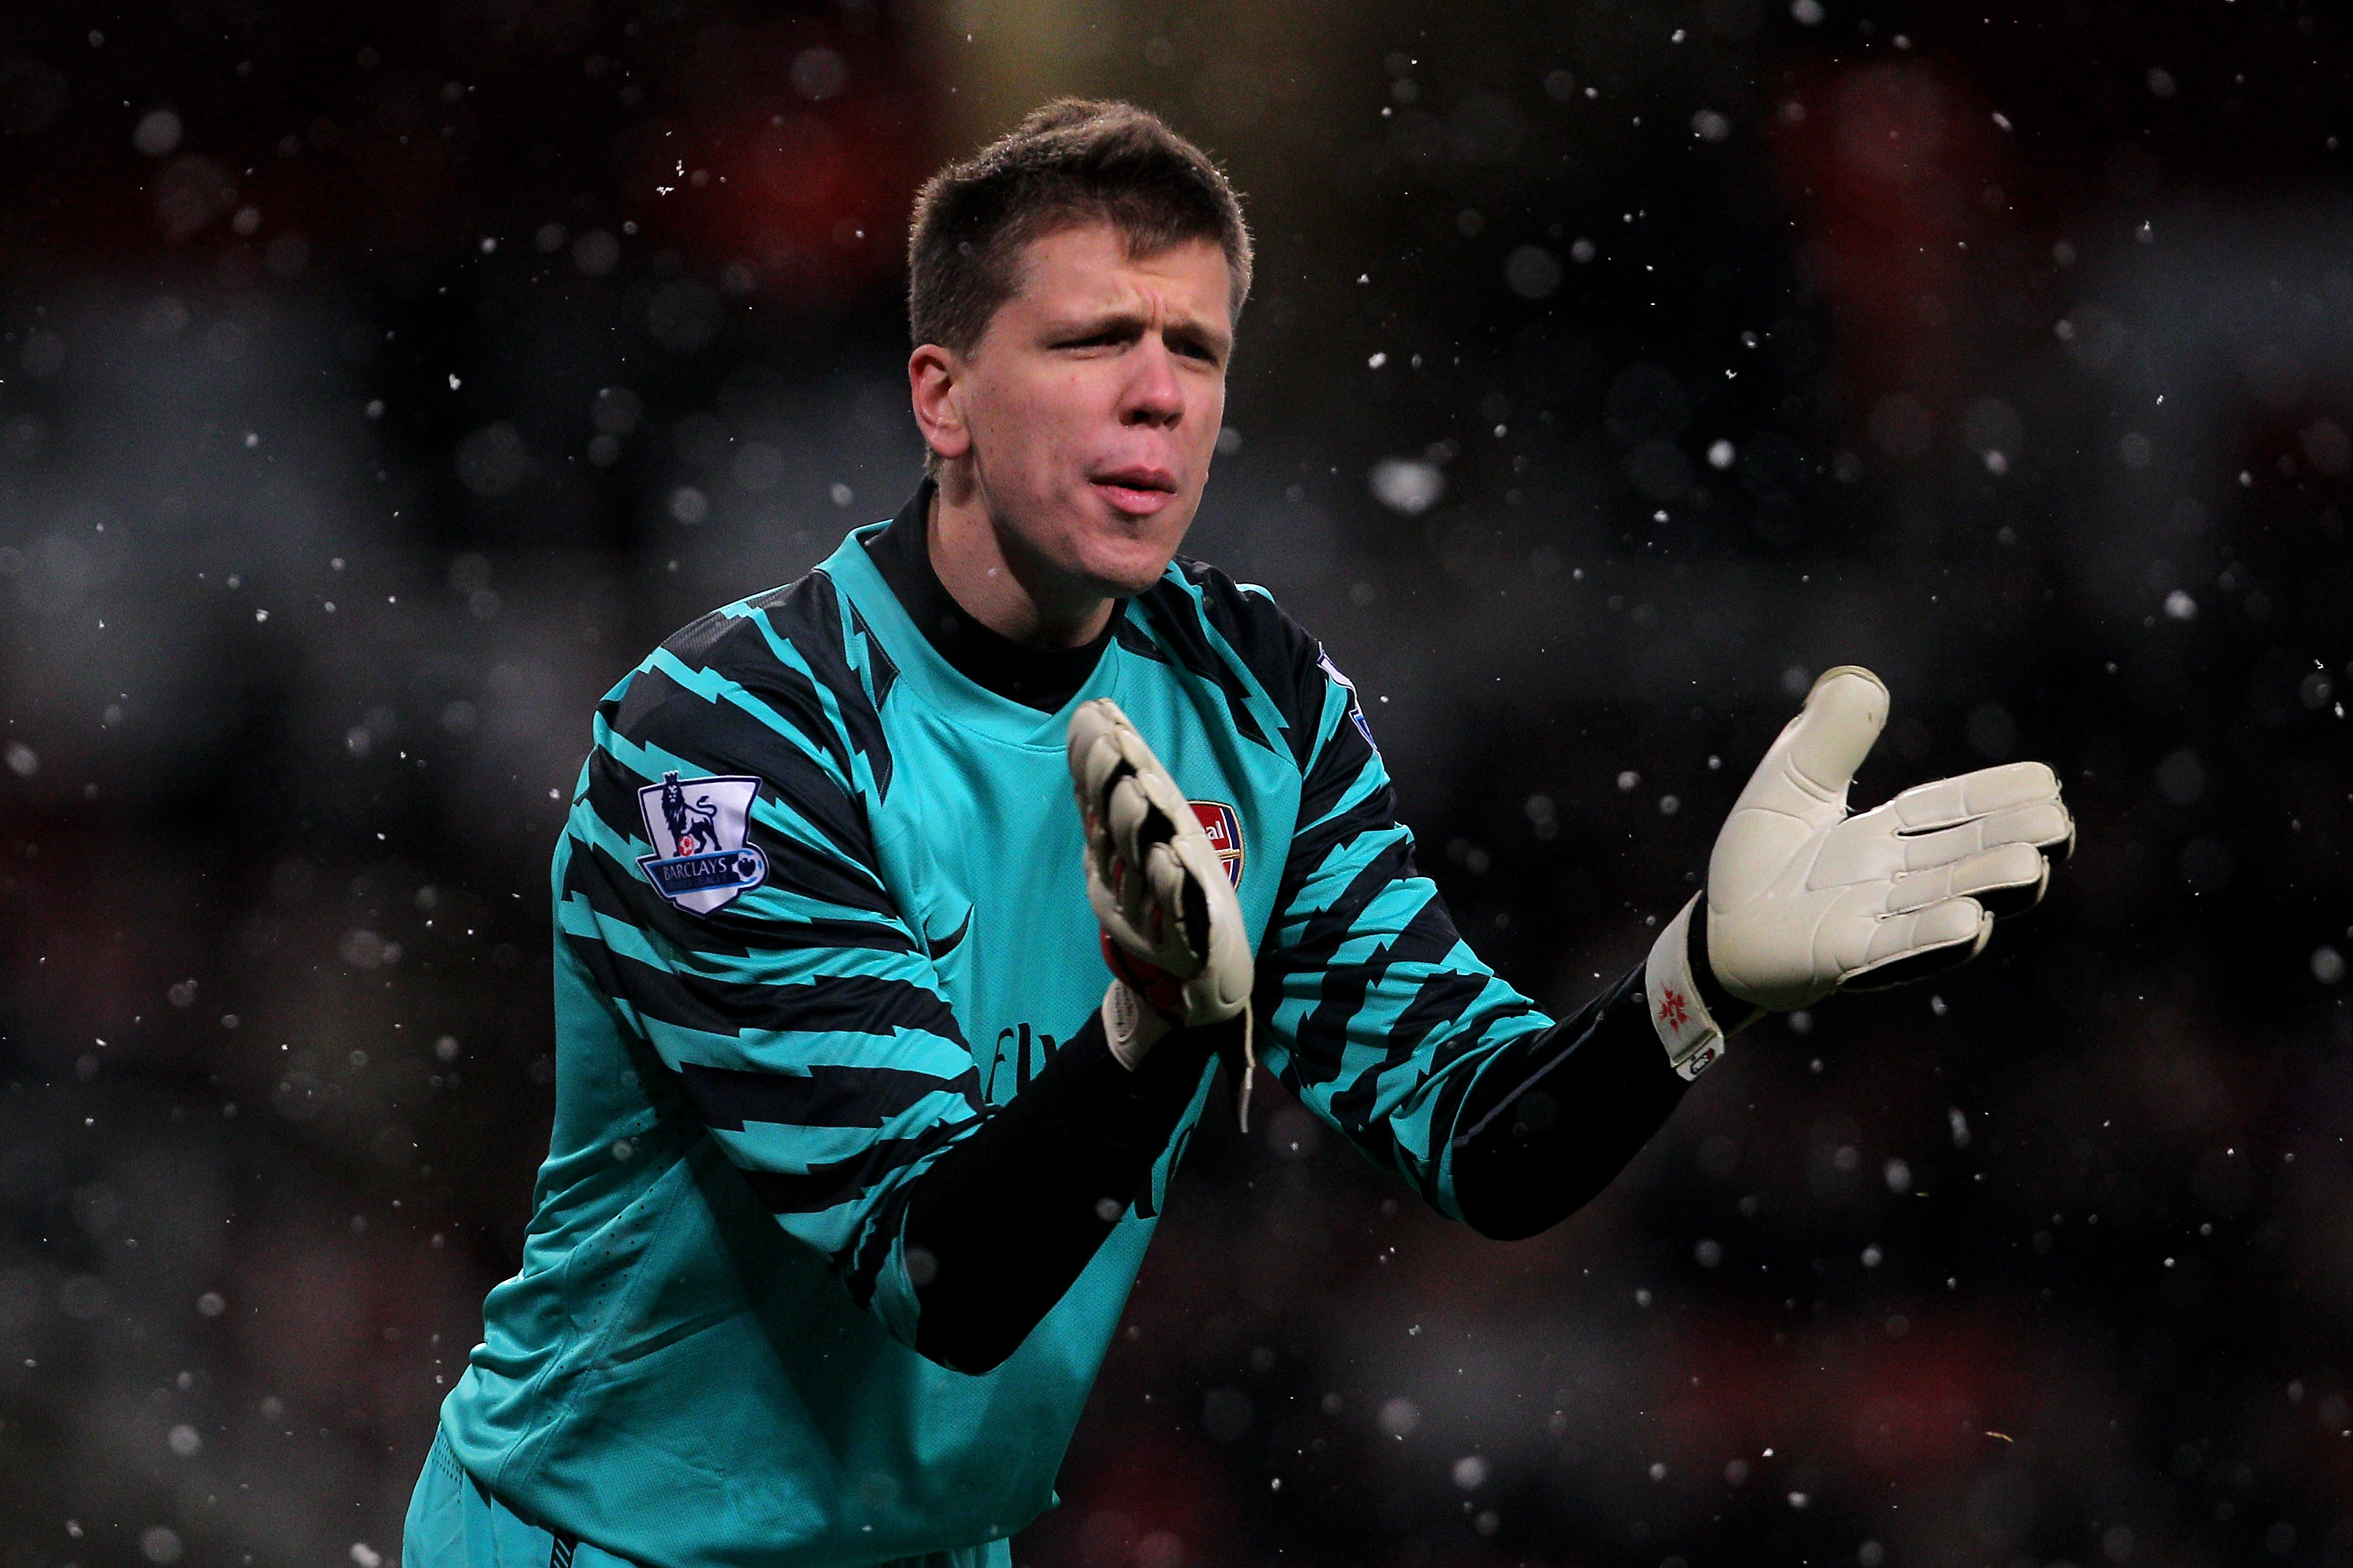 LONDON, ENGLAND - NOVEMBER 30:  Wojciech Szczesny of Arsenal gestures during the Carling Cup quarter final match between Arsenal and Wigan Athletic at the Emirates Stadium on November 30, 2010 in London, England.  (Photo by Clive Rose/Getty Images)